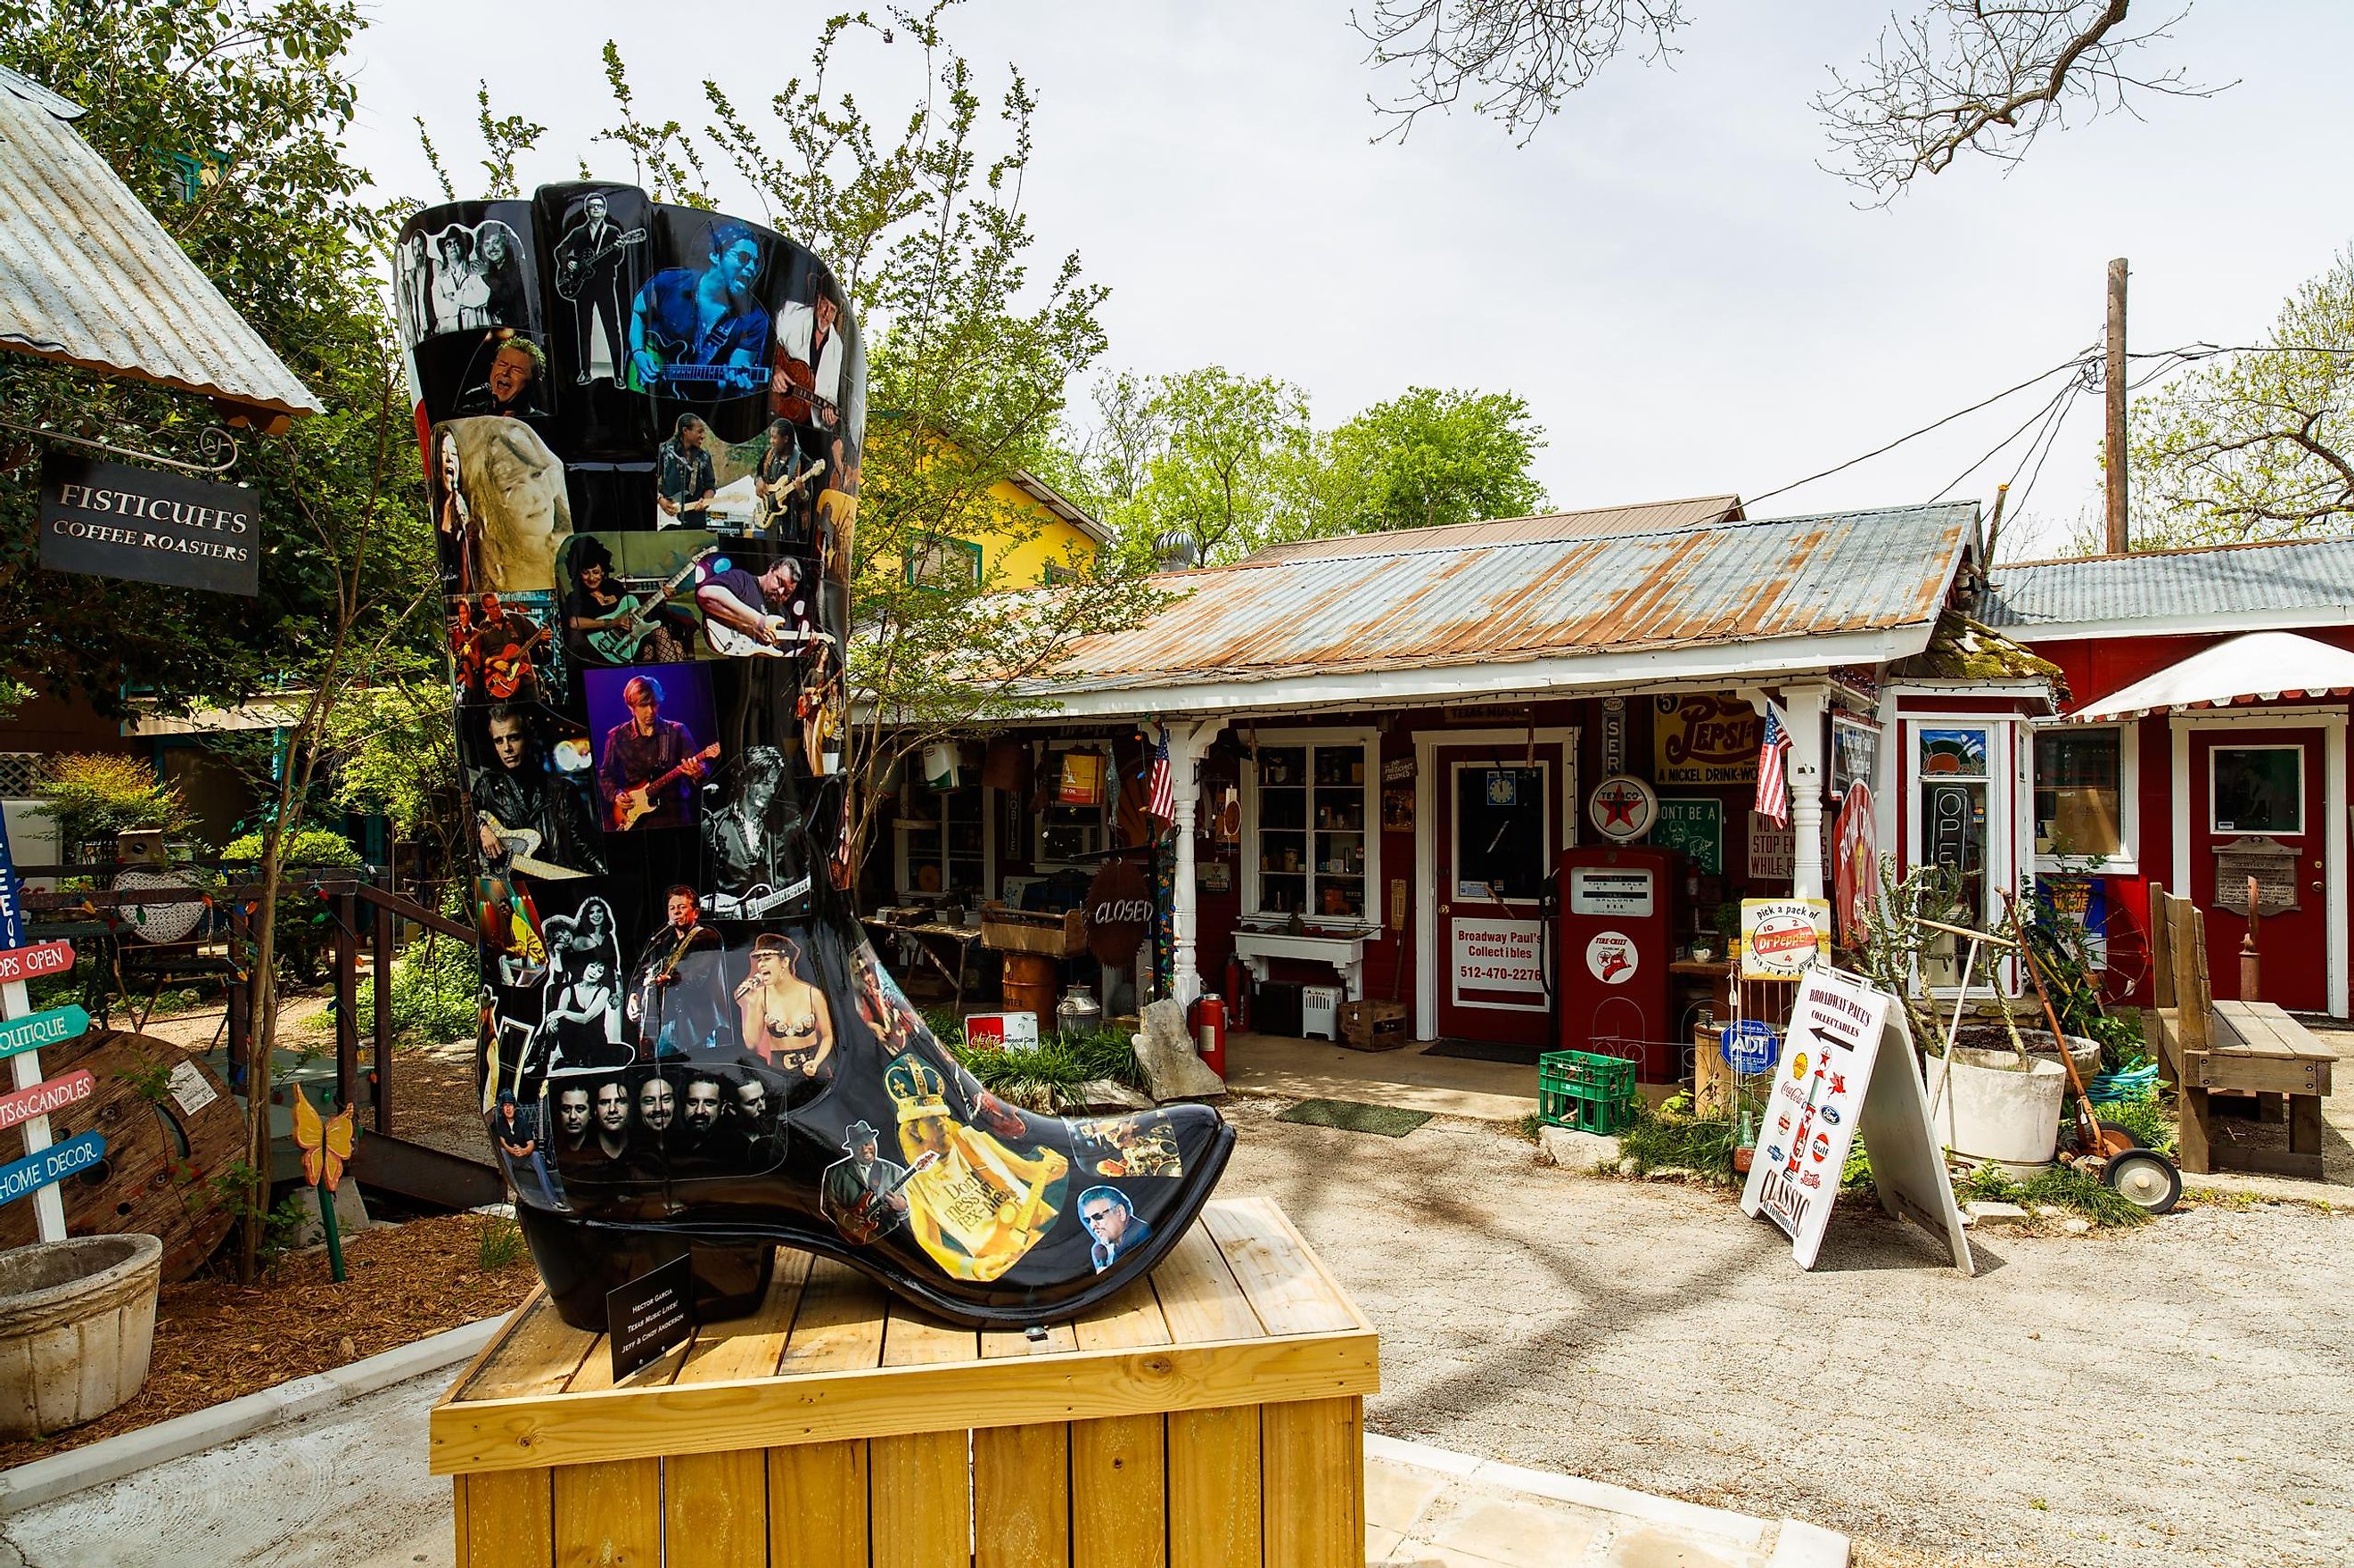 The Best Things To Do In Wimberley, Texas